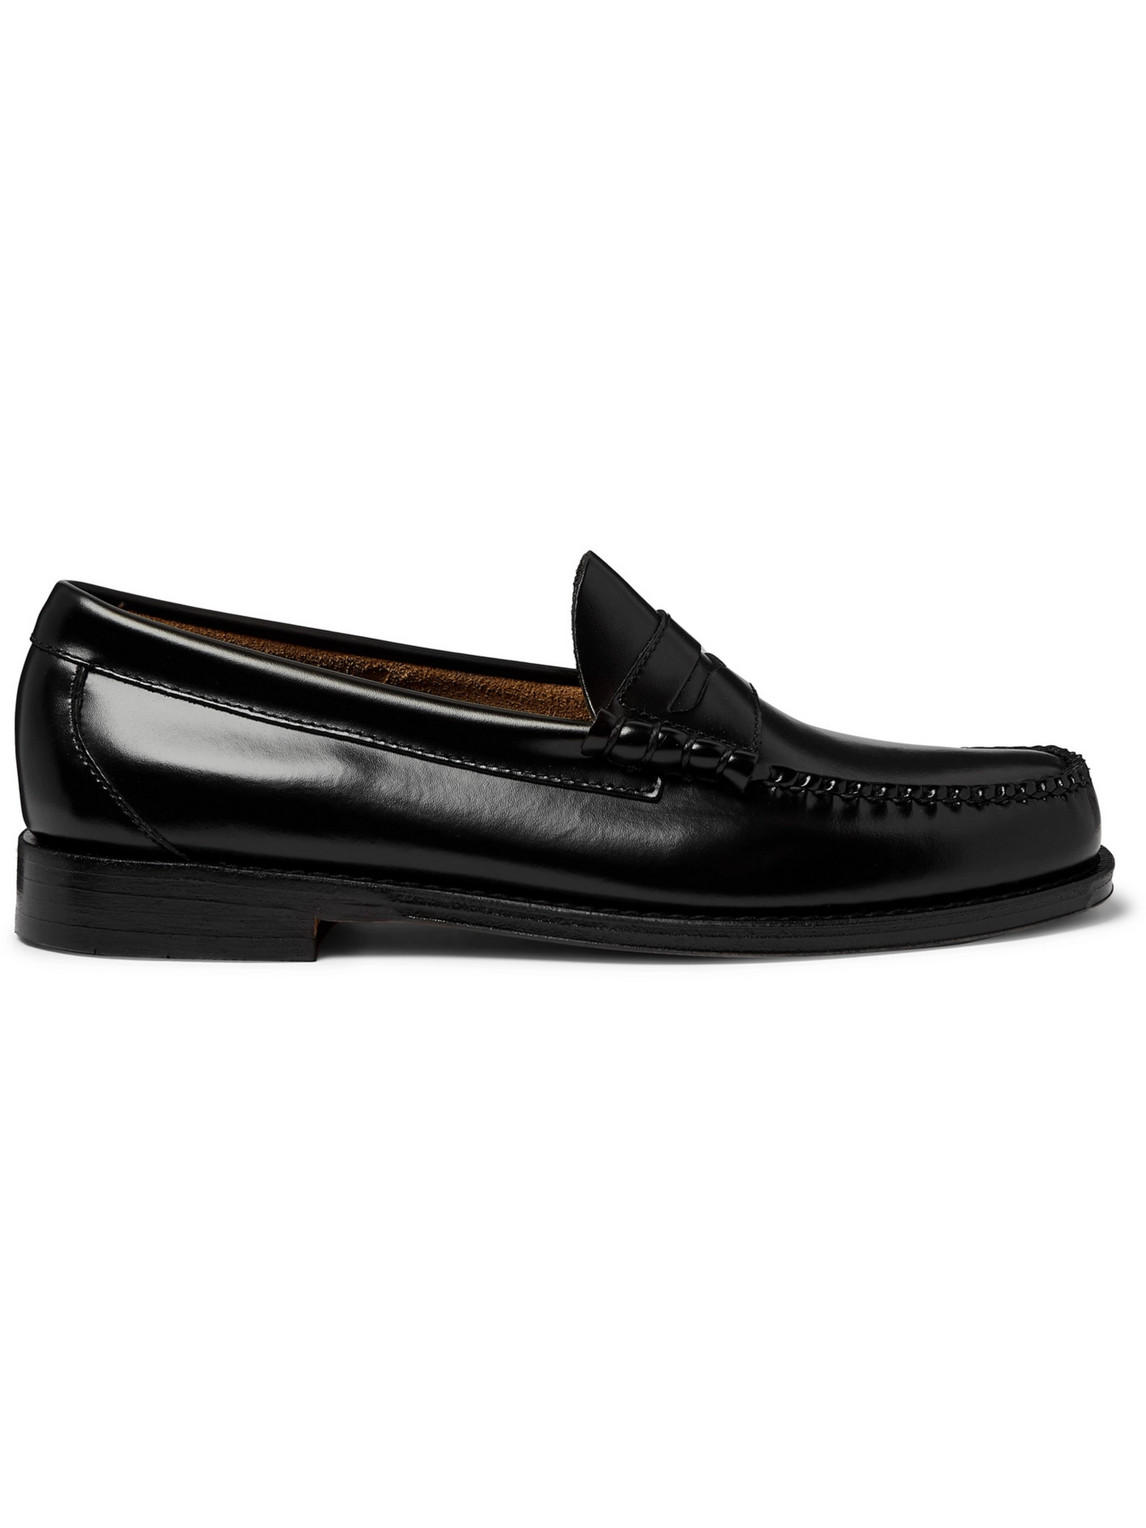 G.H. Bass & Co. - Weejuns Heritage Larson Leather Penny Loafers - Men - Black - UK 10 von G.H. Bass & Co.